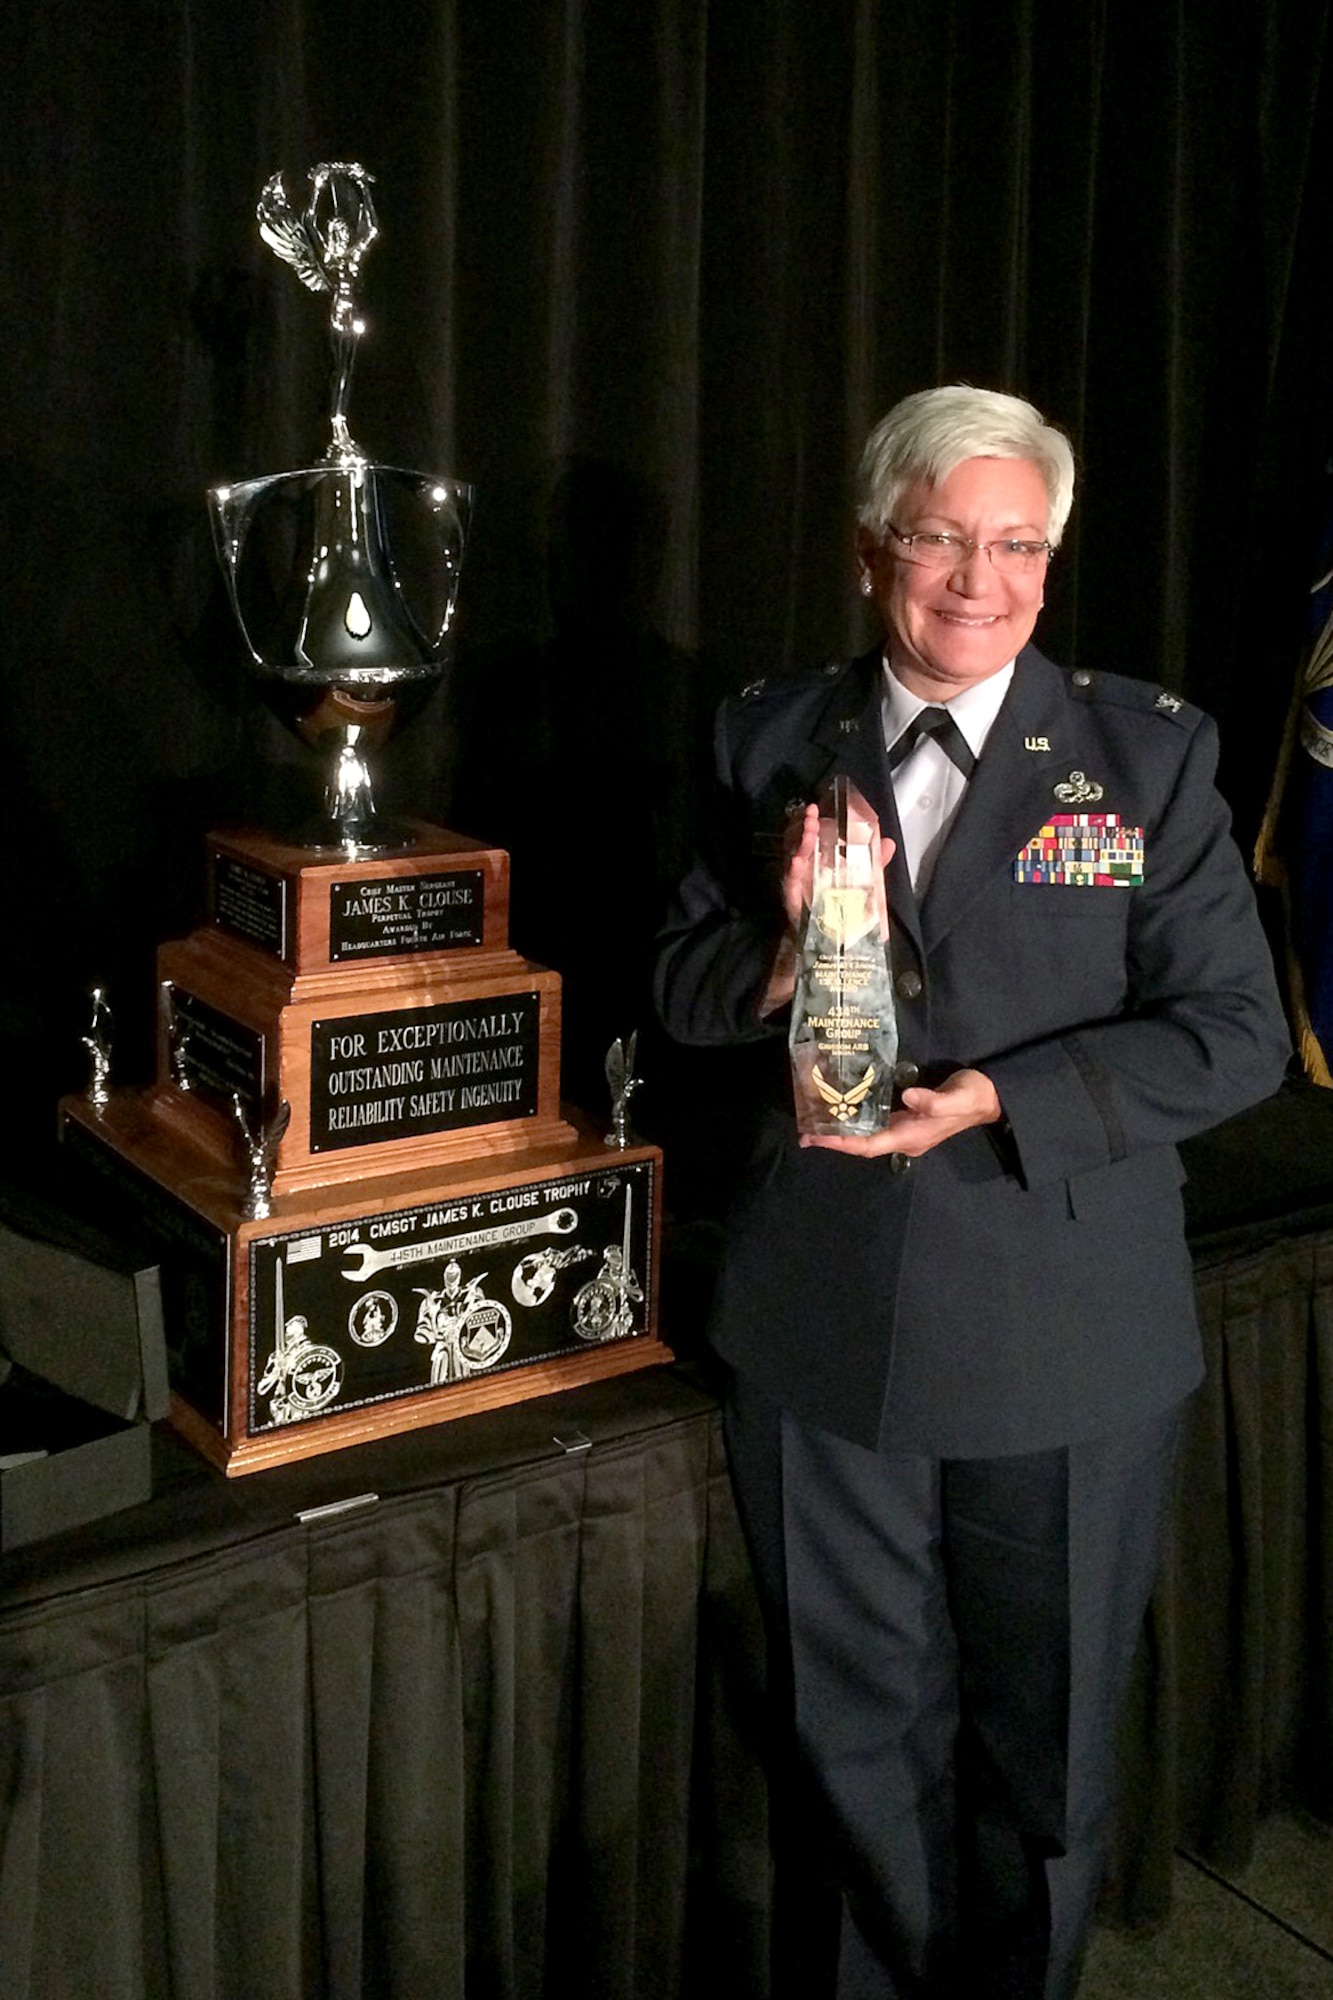 Col. Anna Schulte, 434th Maintenance Group commander, poses with the Chief Master Sgt. James K. Clouse Trophy at March Air Reserve Base, Calif., Nov. 11, 2015. The award is presented to recognize excellence among maintenance organizations within Fourth Air Force. (U.S. Air Force photo)